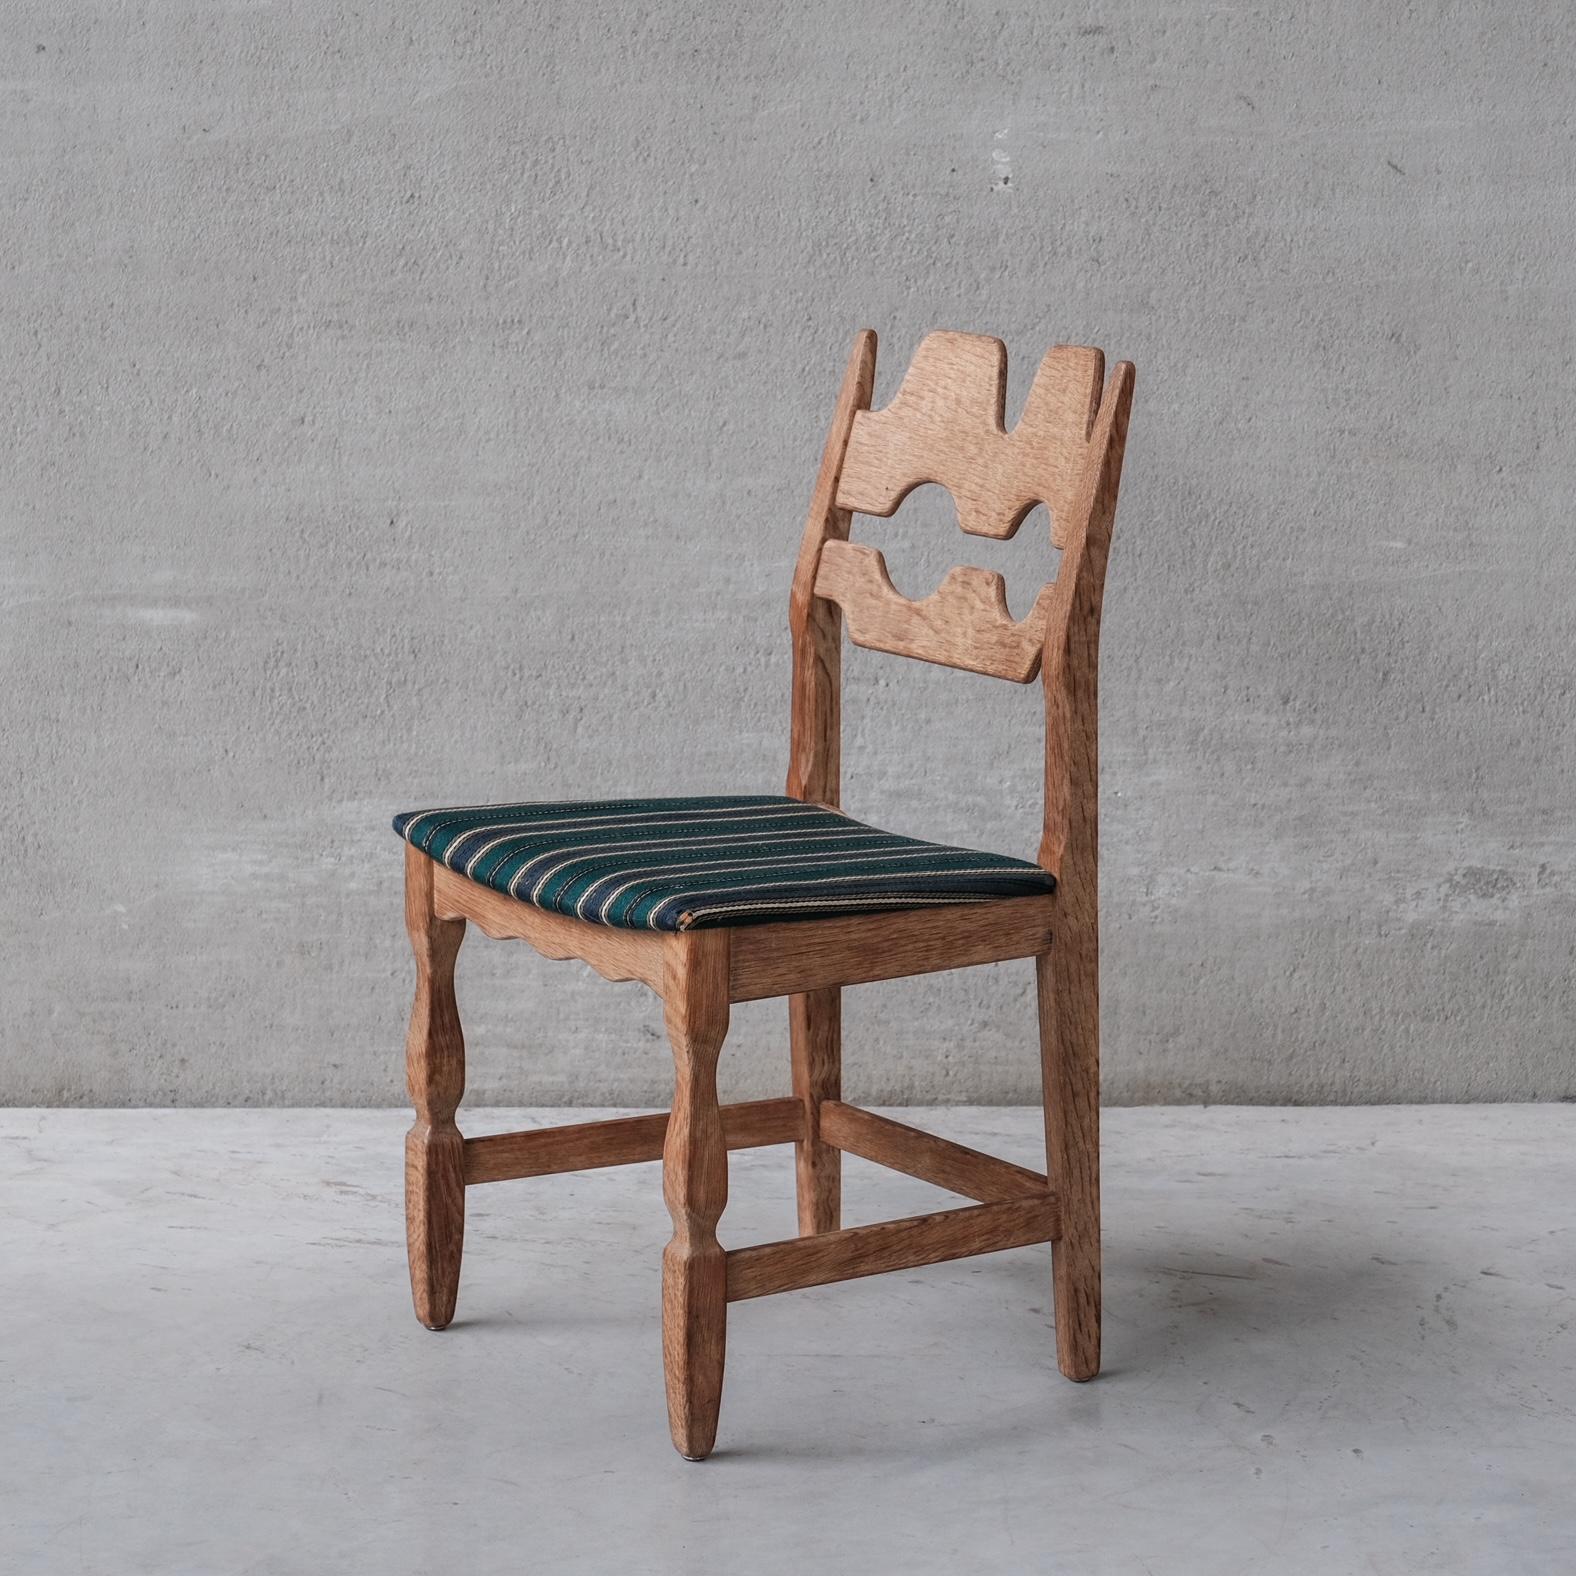 Oak dining chairs by Henning Kjaernulf. A set of six.

Denmark, circa 1960s.

'Razor back' or 'Razor blade' model.

Original patina and finish.

Original upholstery has been retained but want's updating, the fabric has signs of age. We can